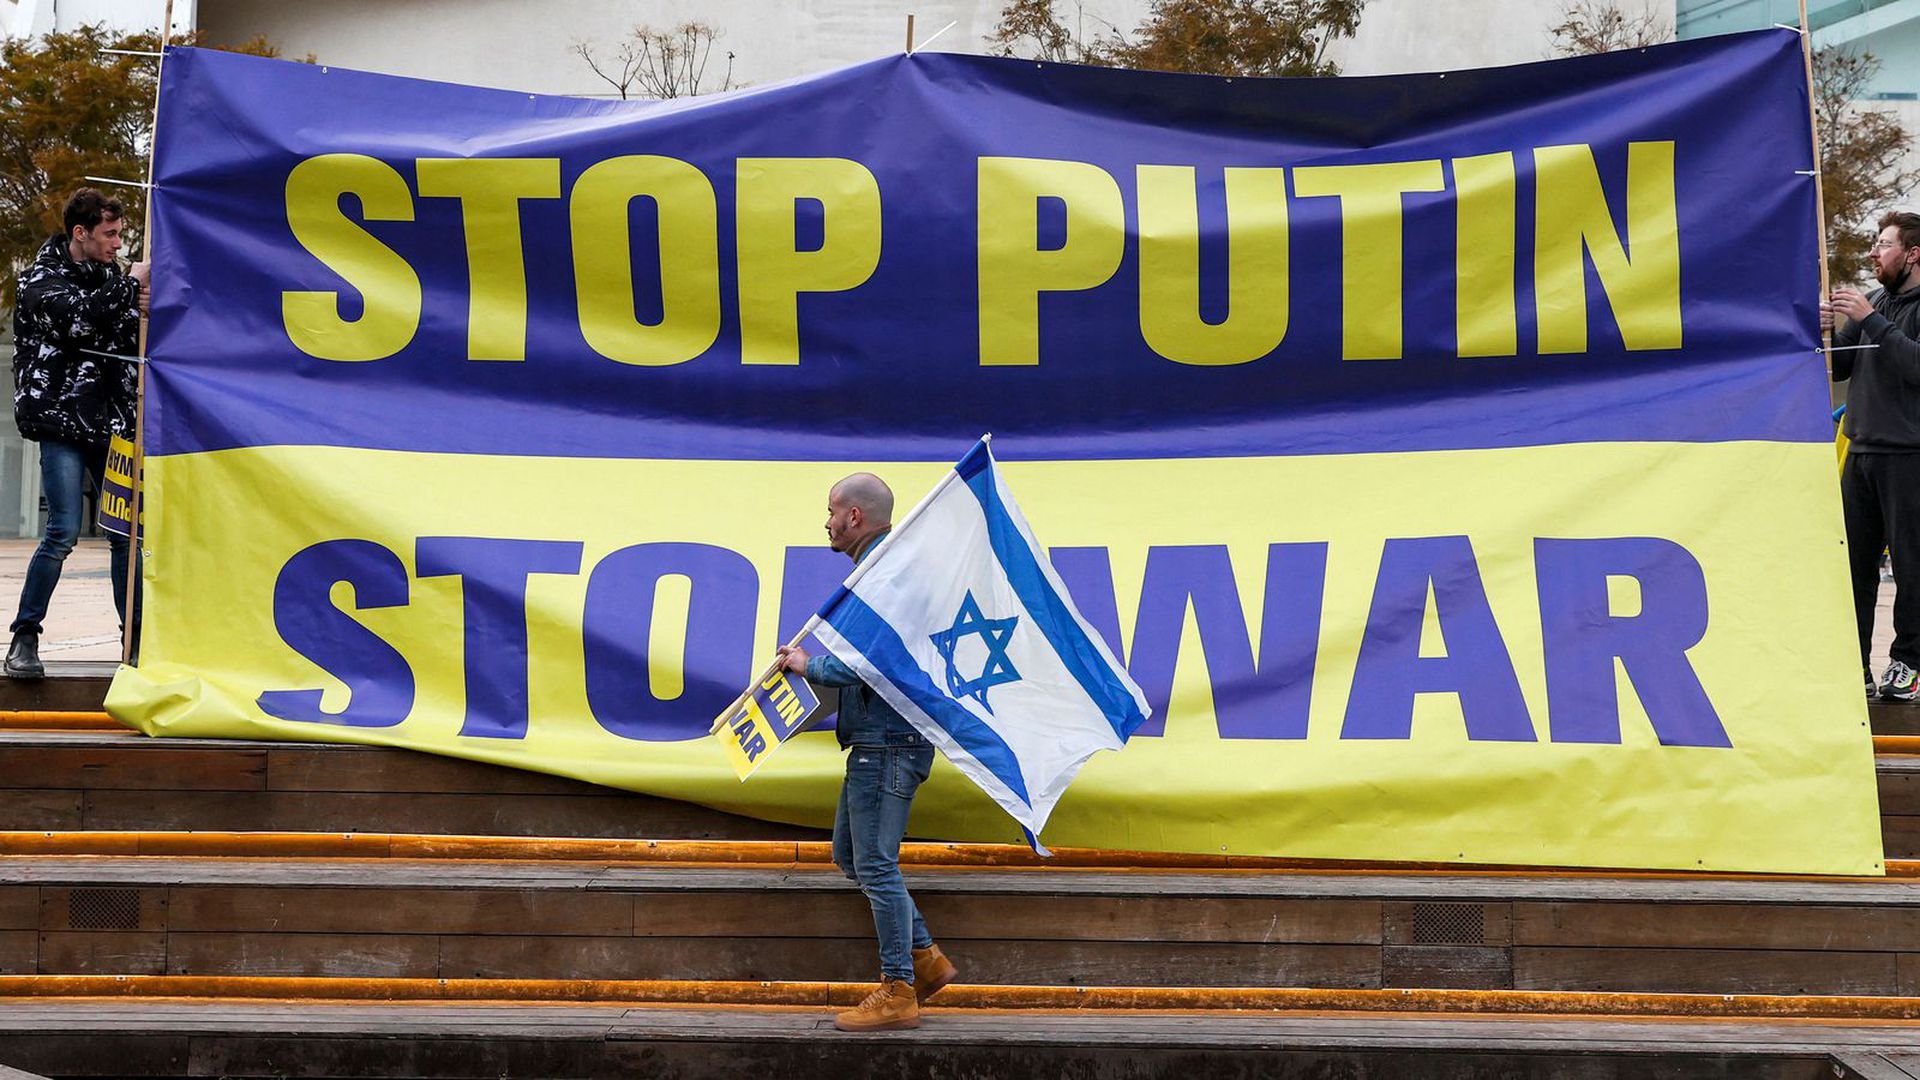 A Tel Aviv demonstrator holds an Israeli flag on March 20 during a protest against Russia's invasion of Ukraine. Photo: Jack Guez/AFP via Getty Images